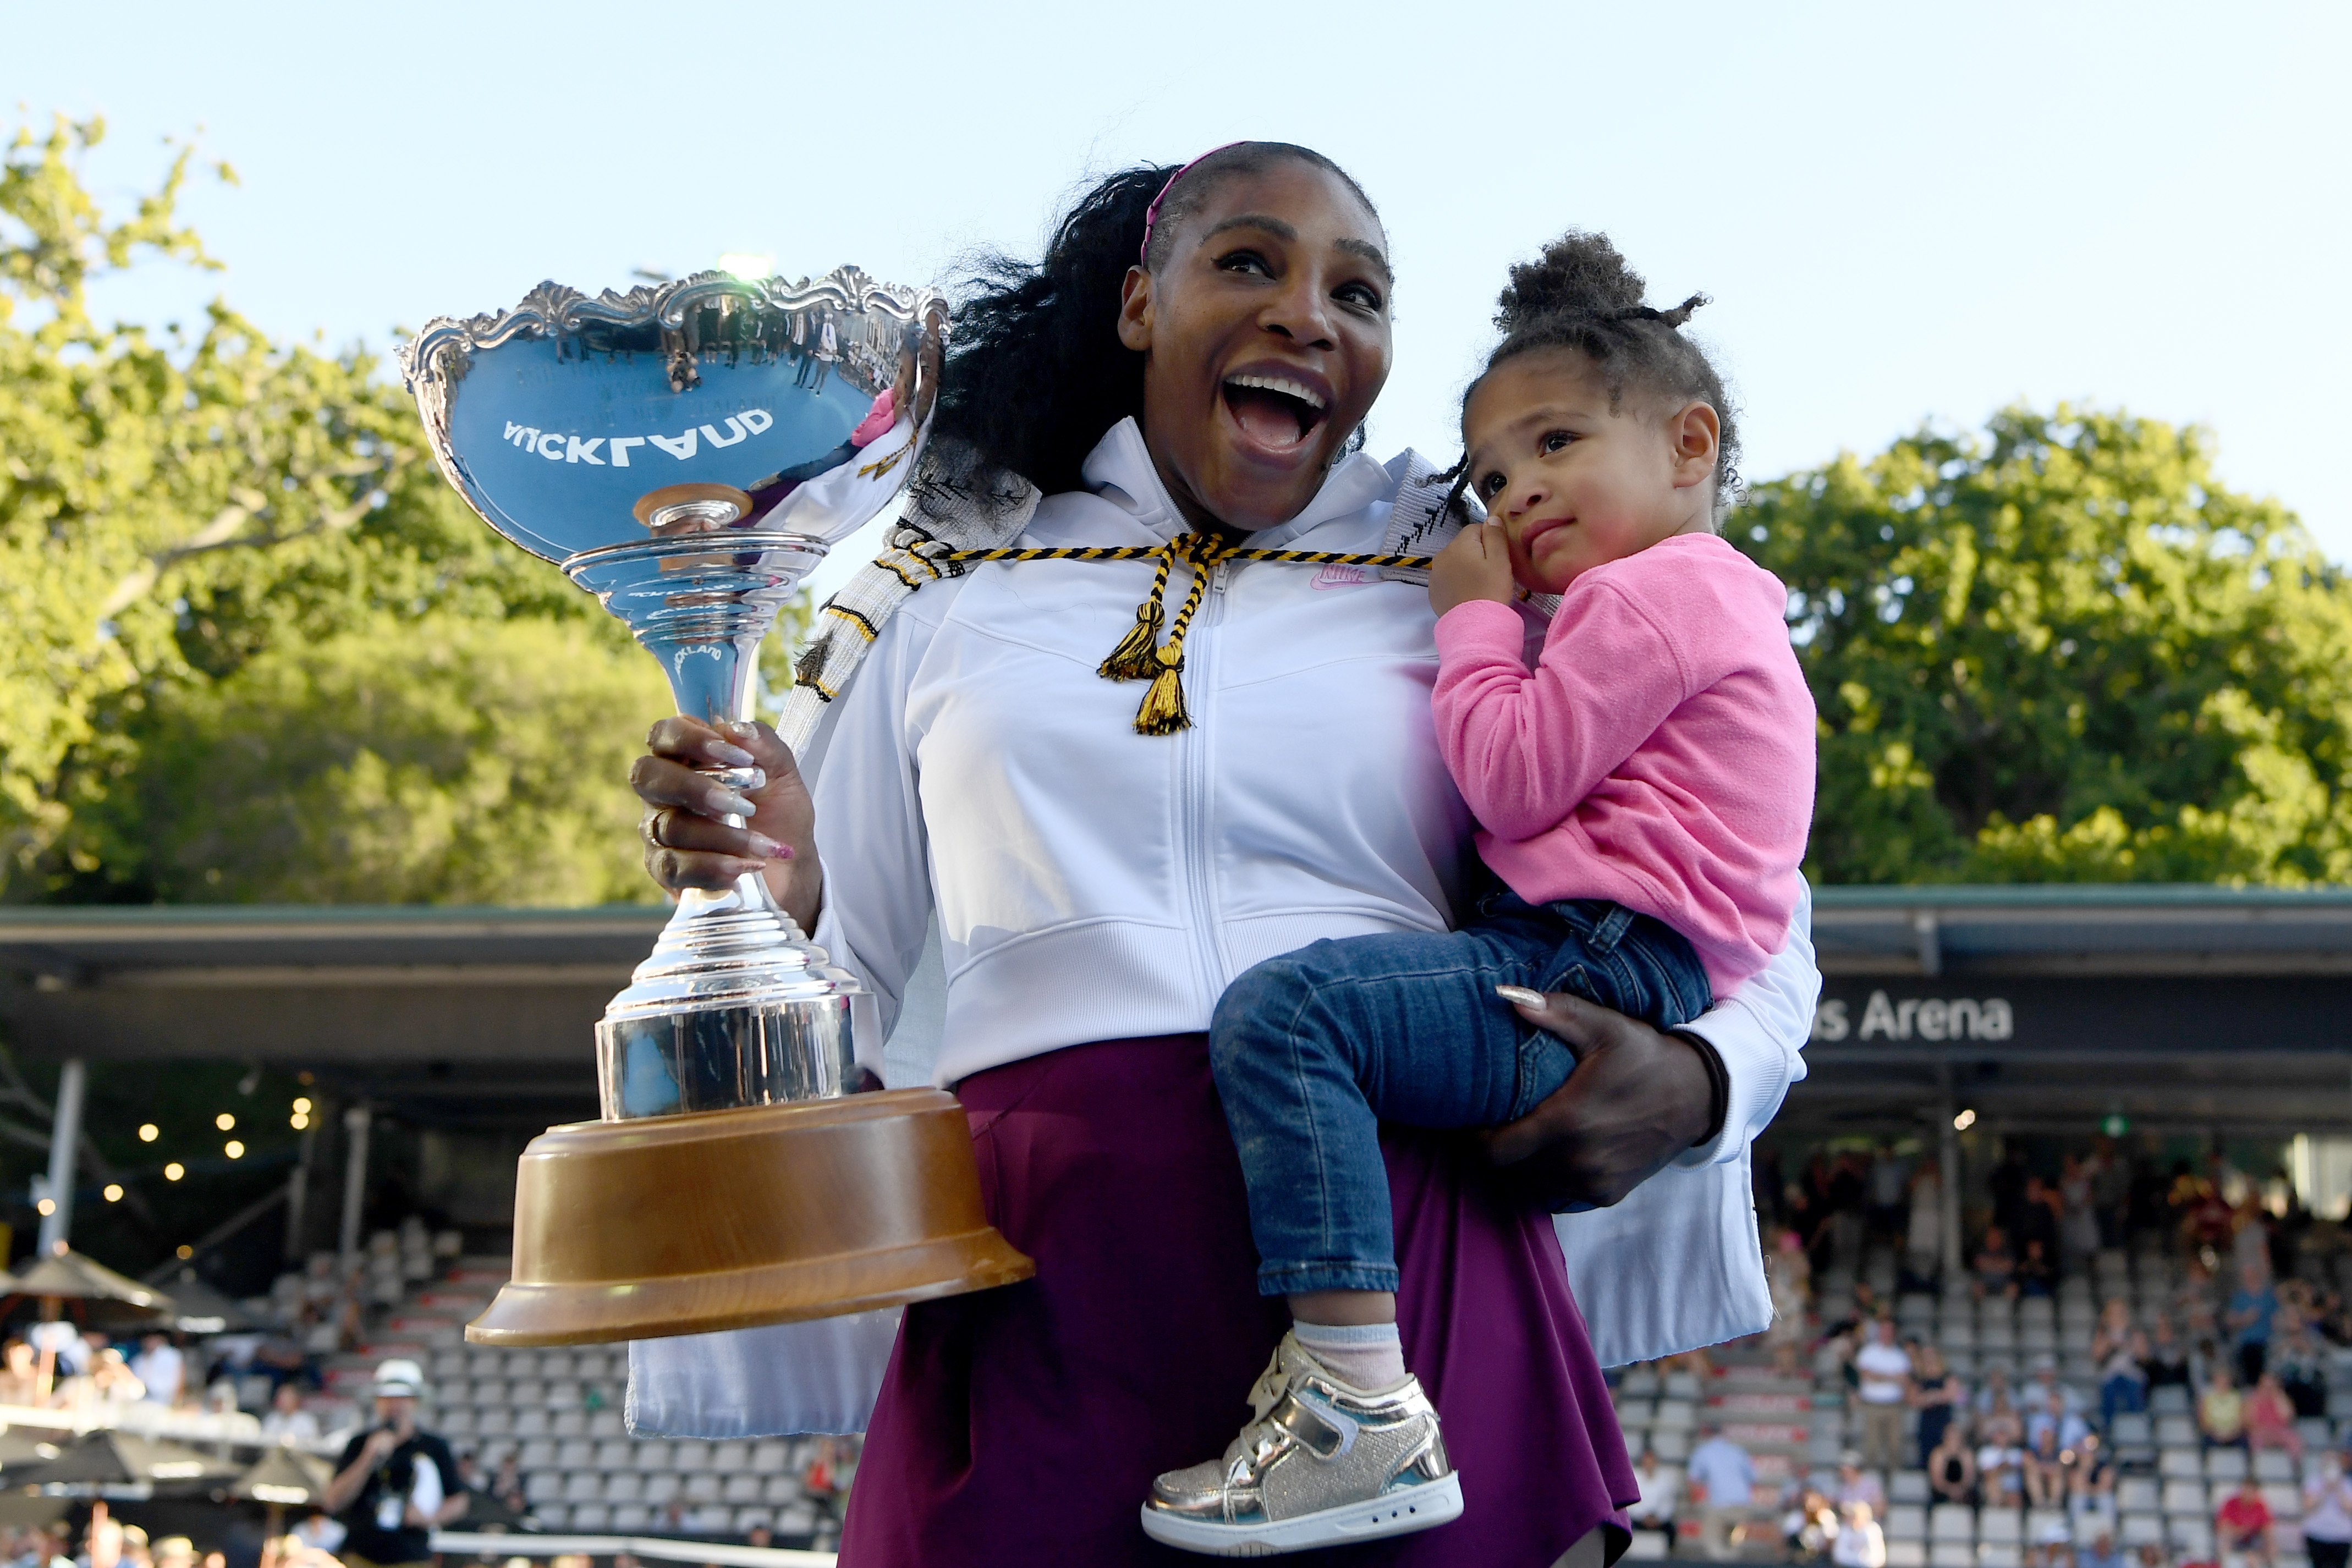 Serena Williams and her daughter Alexis Olympia after winning the final match against Jessica Pegula in 2020, New Zealand | Source: Getty Images